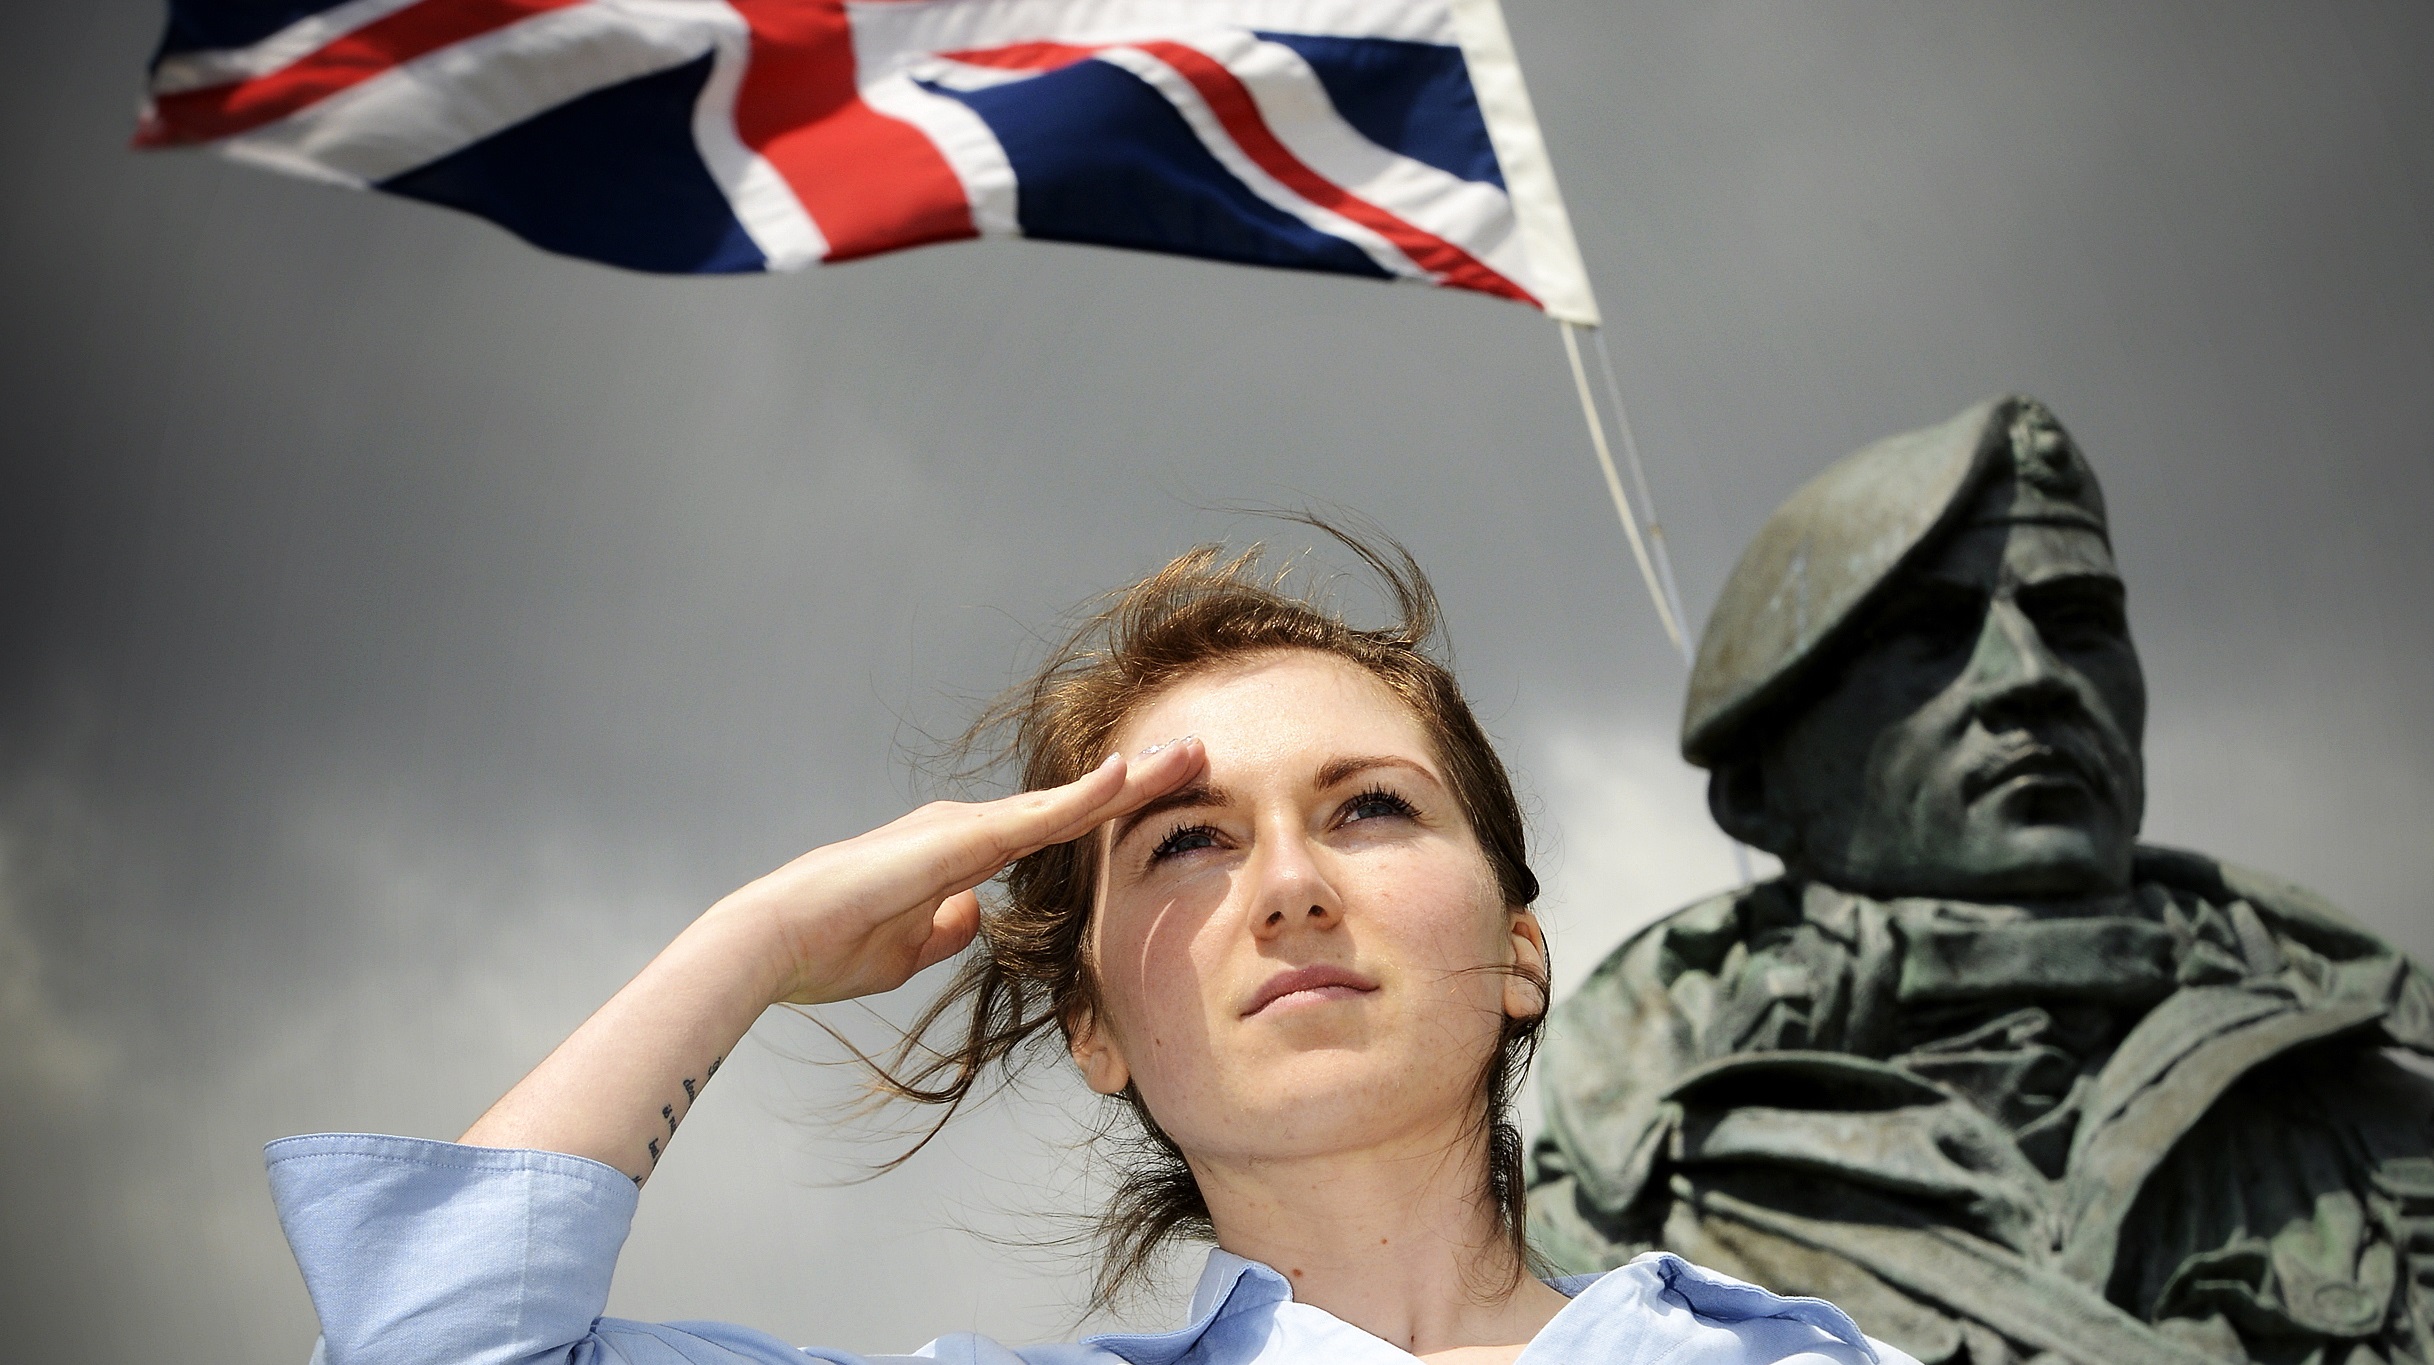 How to #SaluteOurForces for Armed Forces Day